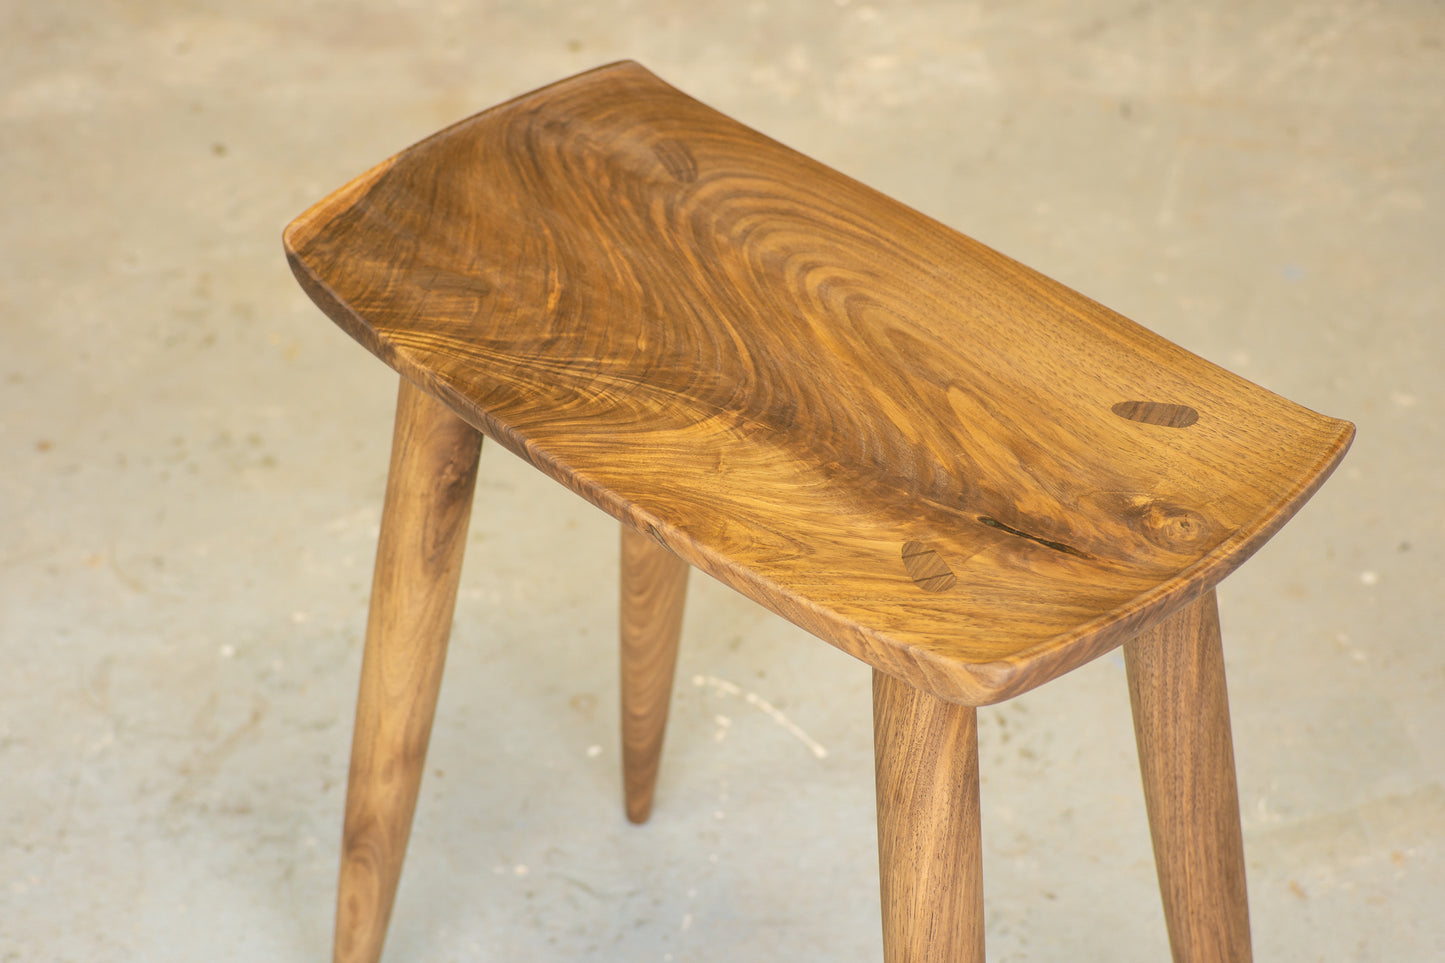 Hand carved Stool